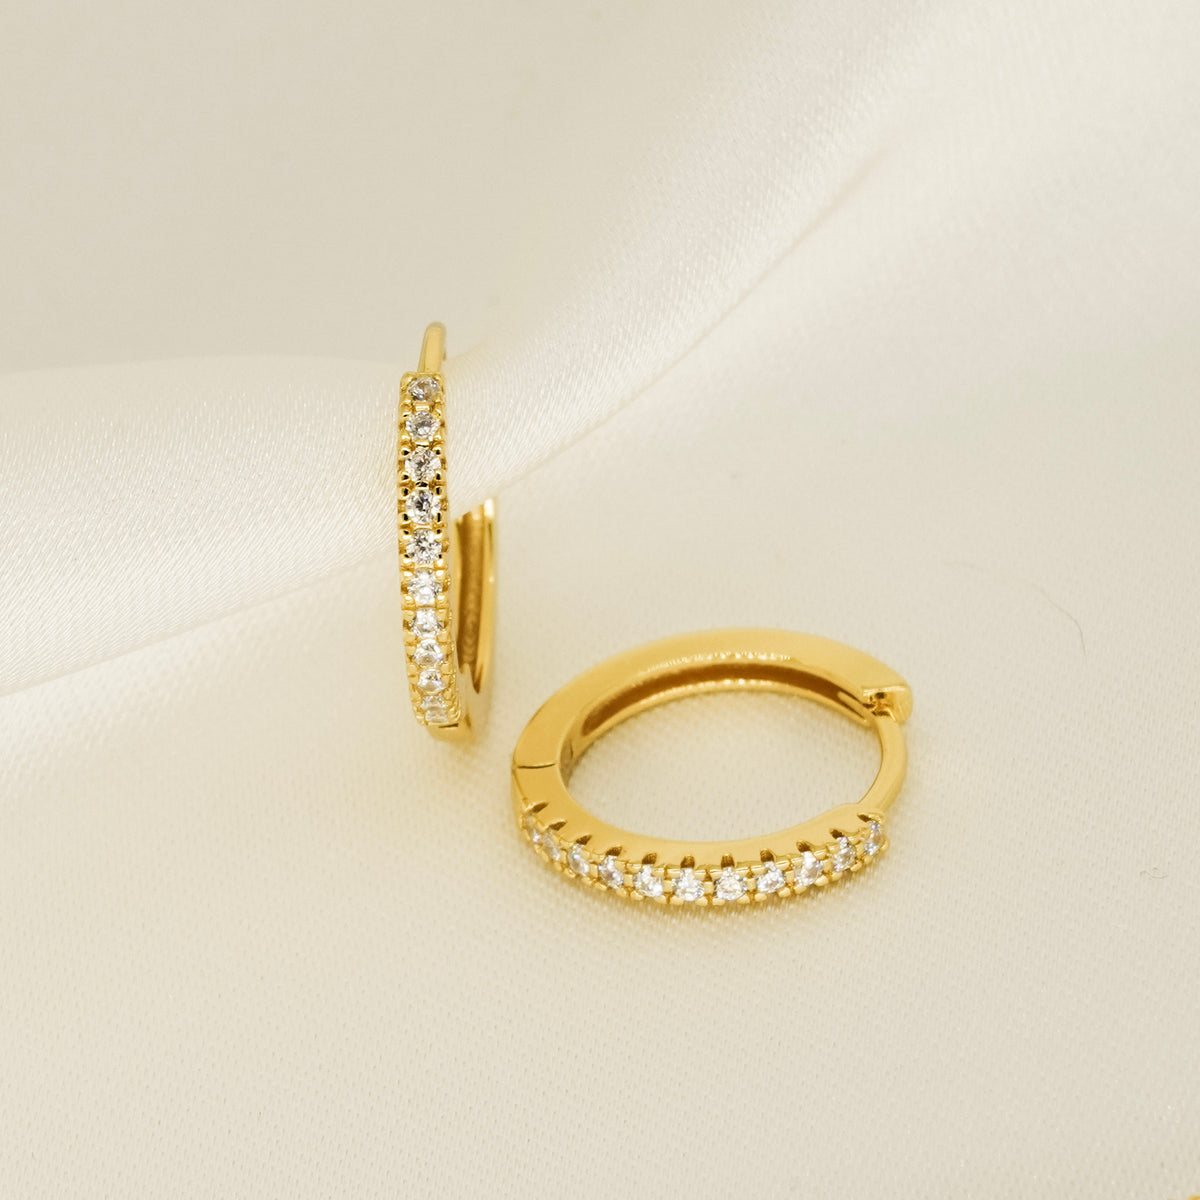 Gold hoop earrings adorned with glistening white stones perfect for gifting. From a small irish brand. 